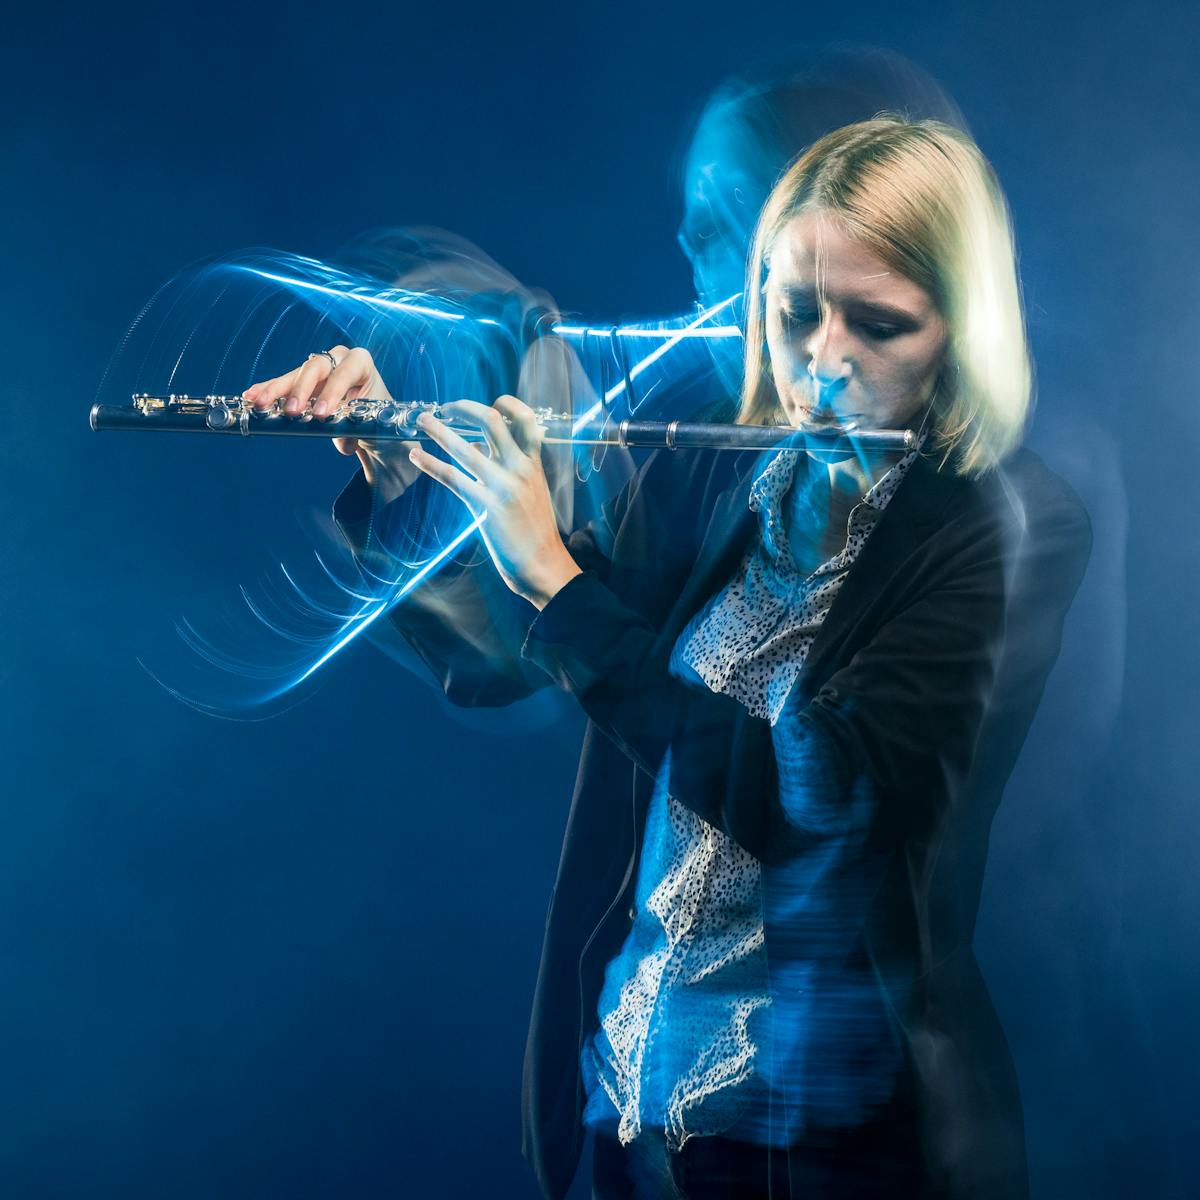 Photograph of a young woman playing a flute against a blue background. The slow exposure of the camera causes her movements to be traced across the image as a blur. She is surrounded by wisps of smoke.